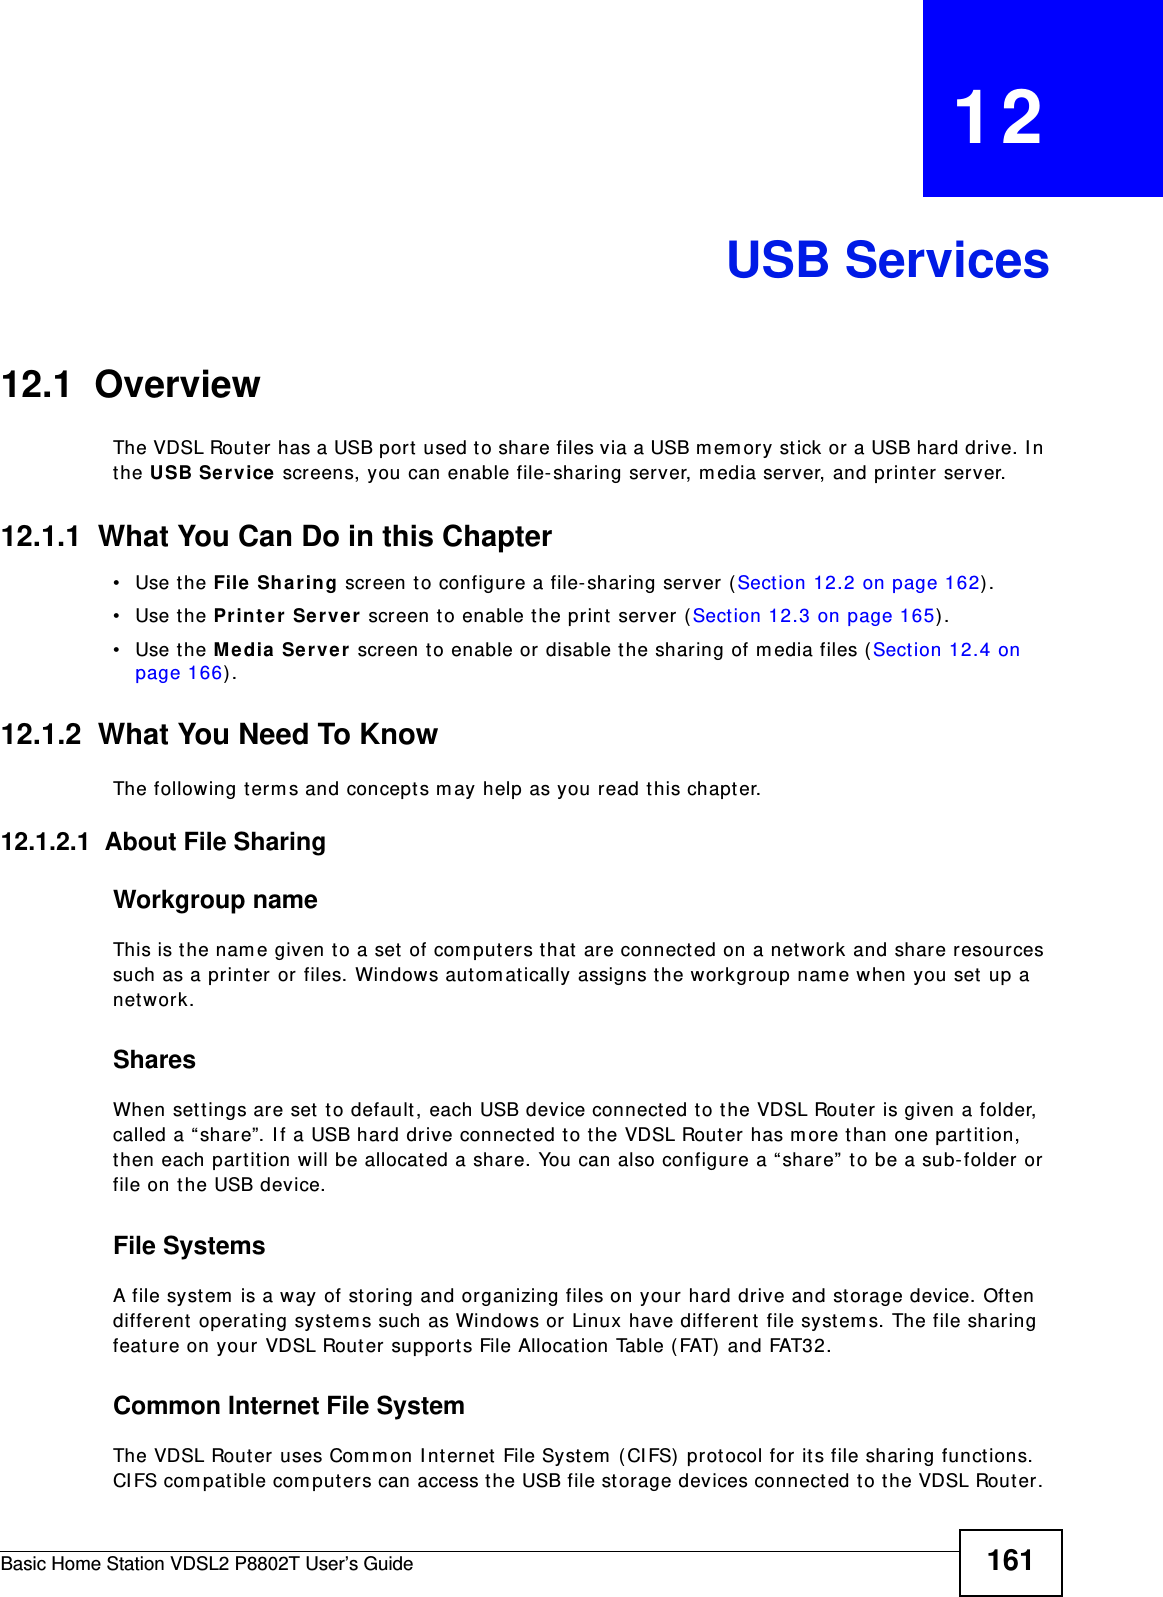 Basic Home Station VDSL2 P8802T User’s Guide 161CHAPTER   12USB Services12.1  Overview The VDSL Rout er has a USB port  used t o share files via a USB m emory st ick or a USB hard drive. I n the USB Se rvice screens, you can enable file- sharing server, m edia server, and print er server.12.1.1  What You Can Do in this Chapter• Use the File Sh aring screen t o configure a file- sharing server ( Sect ion 12.2 on page 162) .• Use the Printer  Server  screen t o enable t he print  server (Sect ion 12.3 on page 165) .• Use the M edia Server  screen to enable or disable the sharing of m edia files (Sect ion 12.4 on page 166) .12.1.2  What You Need To KnowThe following t erm s and concept s m ay help as you r ead t his chapter.12.1.2.1  About File SharingWorkgroup nameThis is the nam e given t o a set  of com puters t hat  are connect ed on a network and share resources such as a printer or files. Windows aut om atically assigns t he workgroup nam e when you set up a net work. SharesWhen set t ings are set t o default, each USB device connect ed to t he VDSL Router  is given a folder, called a “ share”. I f a USB hard drive connect ed to t he VDSL Router  has m ore t han one part ition, then each part ition will be allocated a share. You can also configure a “ share”  to be a sub- folder or file on t he USB device.File SystemsA file syst em  is a way of st oring and organizing files on your hard drive and storage device. Often different  operat ing syst em s such as Windows or  Linux have different  file syst em s. The file sharing feat ure on your VDSL Router support s File Allocation Table ( FAT)  and FAT32. Common Internet File SystemThe VDSL Router uses Com m on I nt ernet File Syst em  ( CI FS)  protocol for its file sharing funct ions. CIFS com patible comput ers can access the USB file st orage devices connected to t he VDSL Router. 